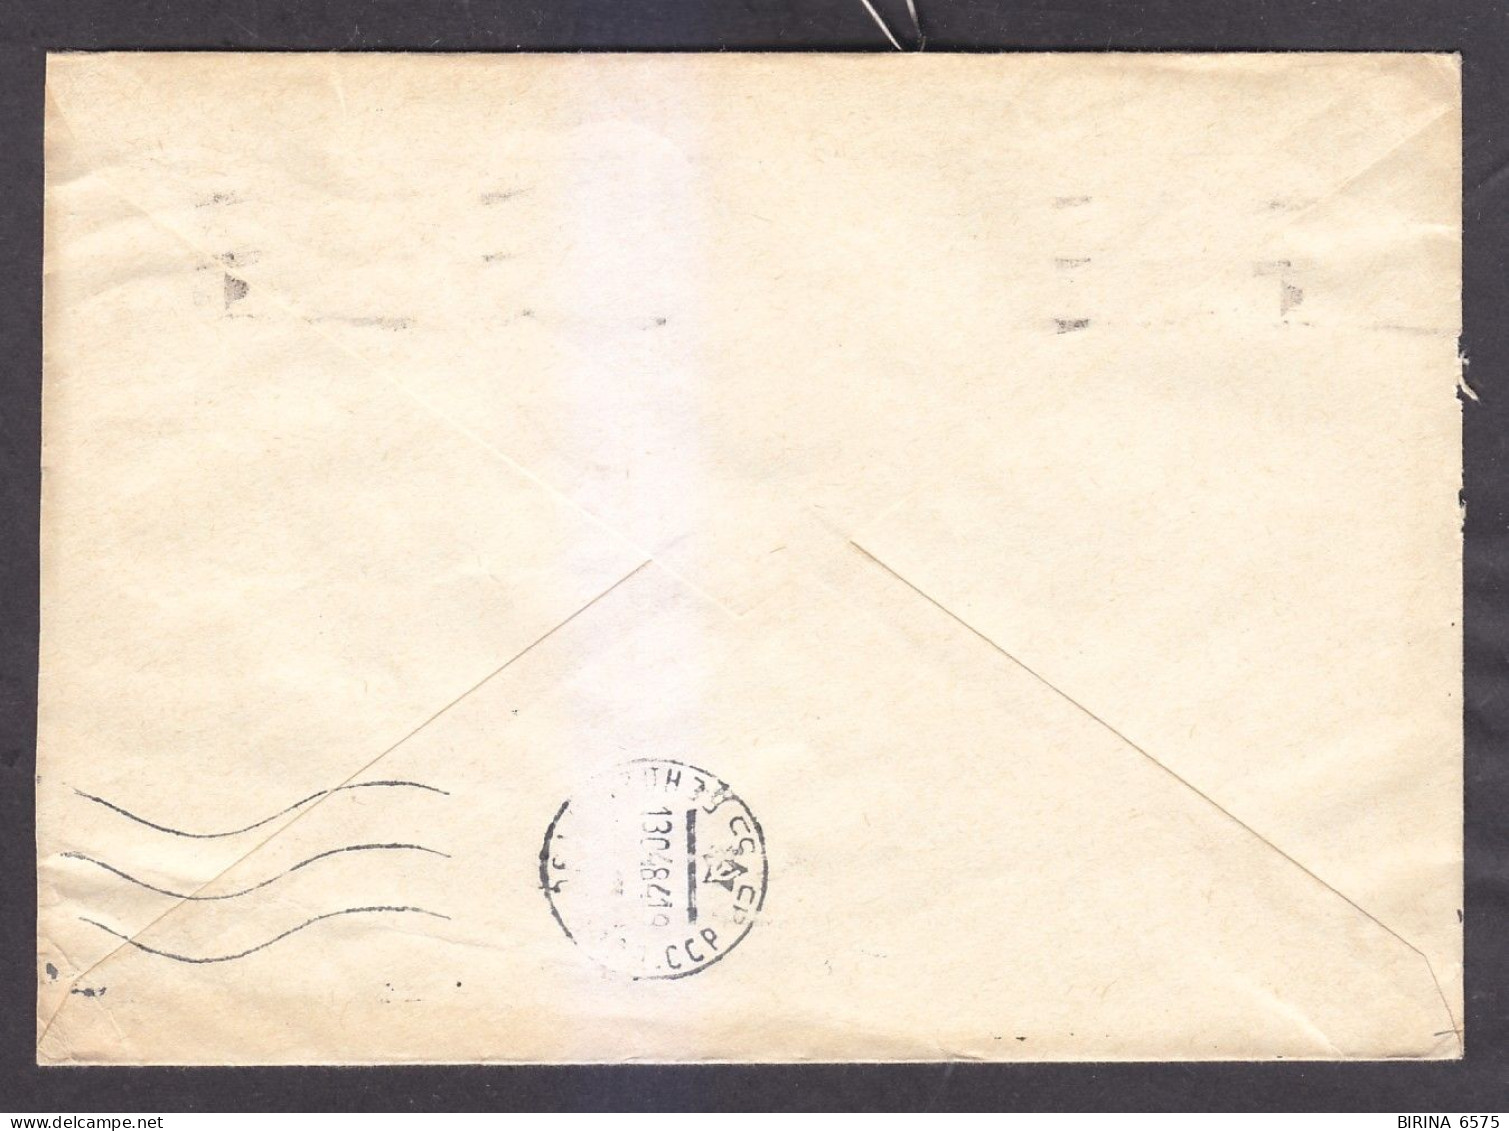 Envelope. The USSR. 200 YEARS OF THE CITY OF KHERSON. Mail. 1984. - 9-31 - Lettres & Documents